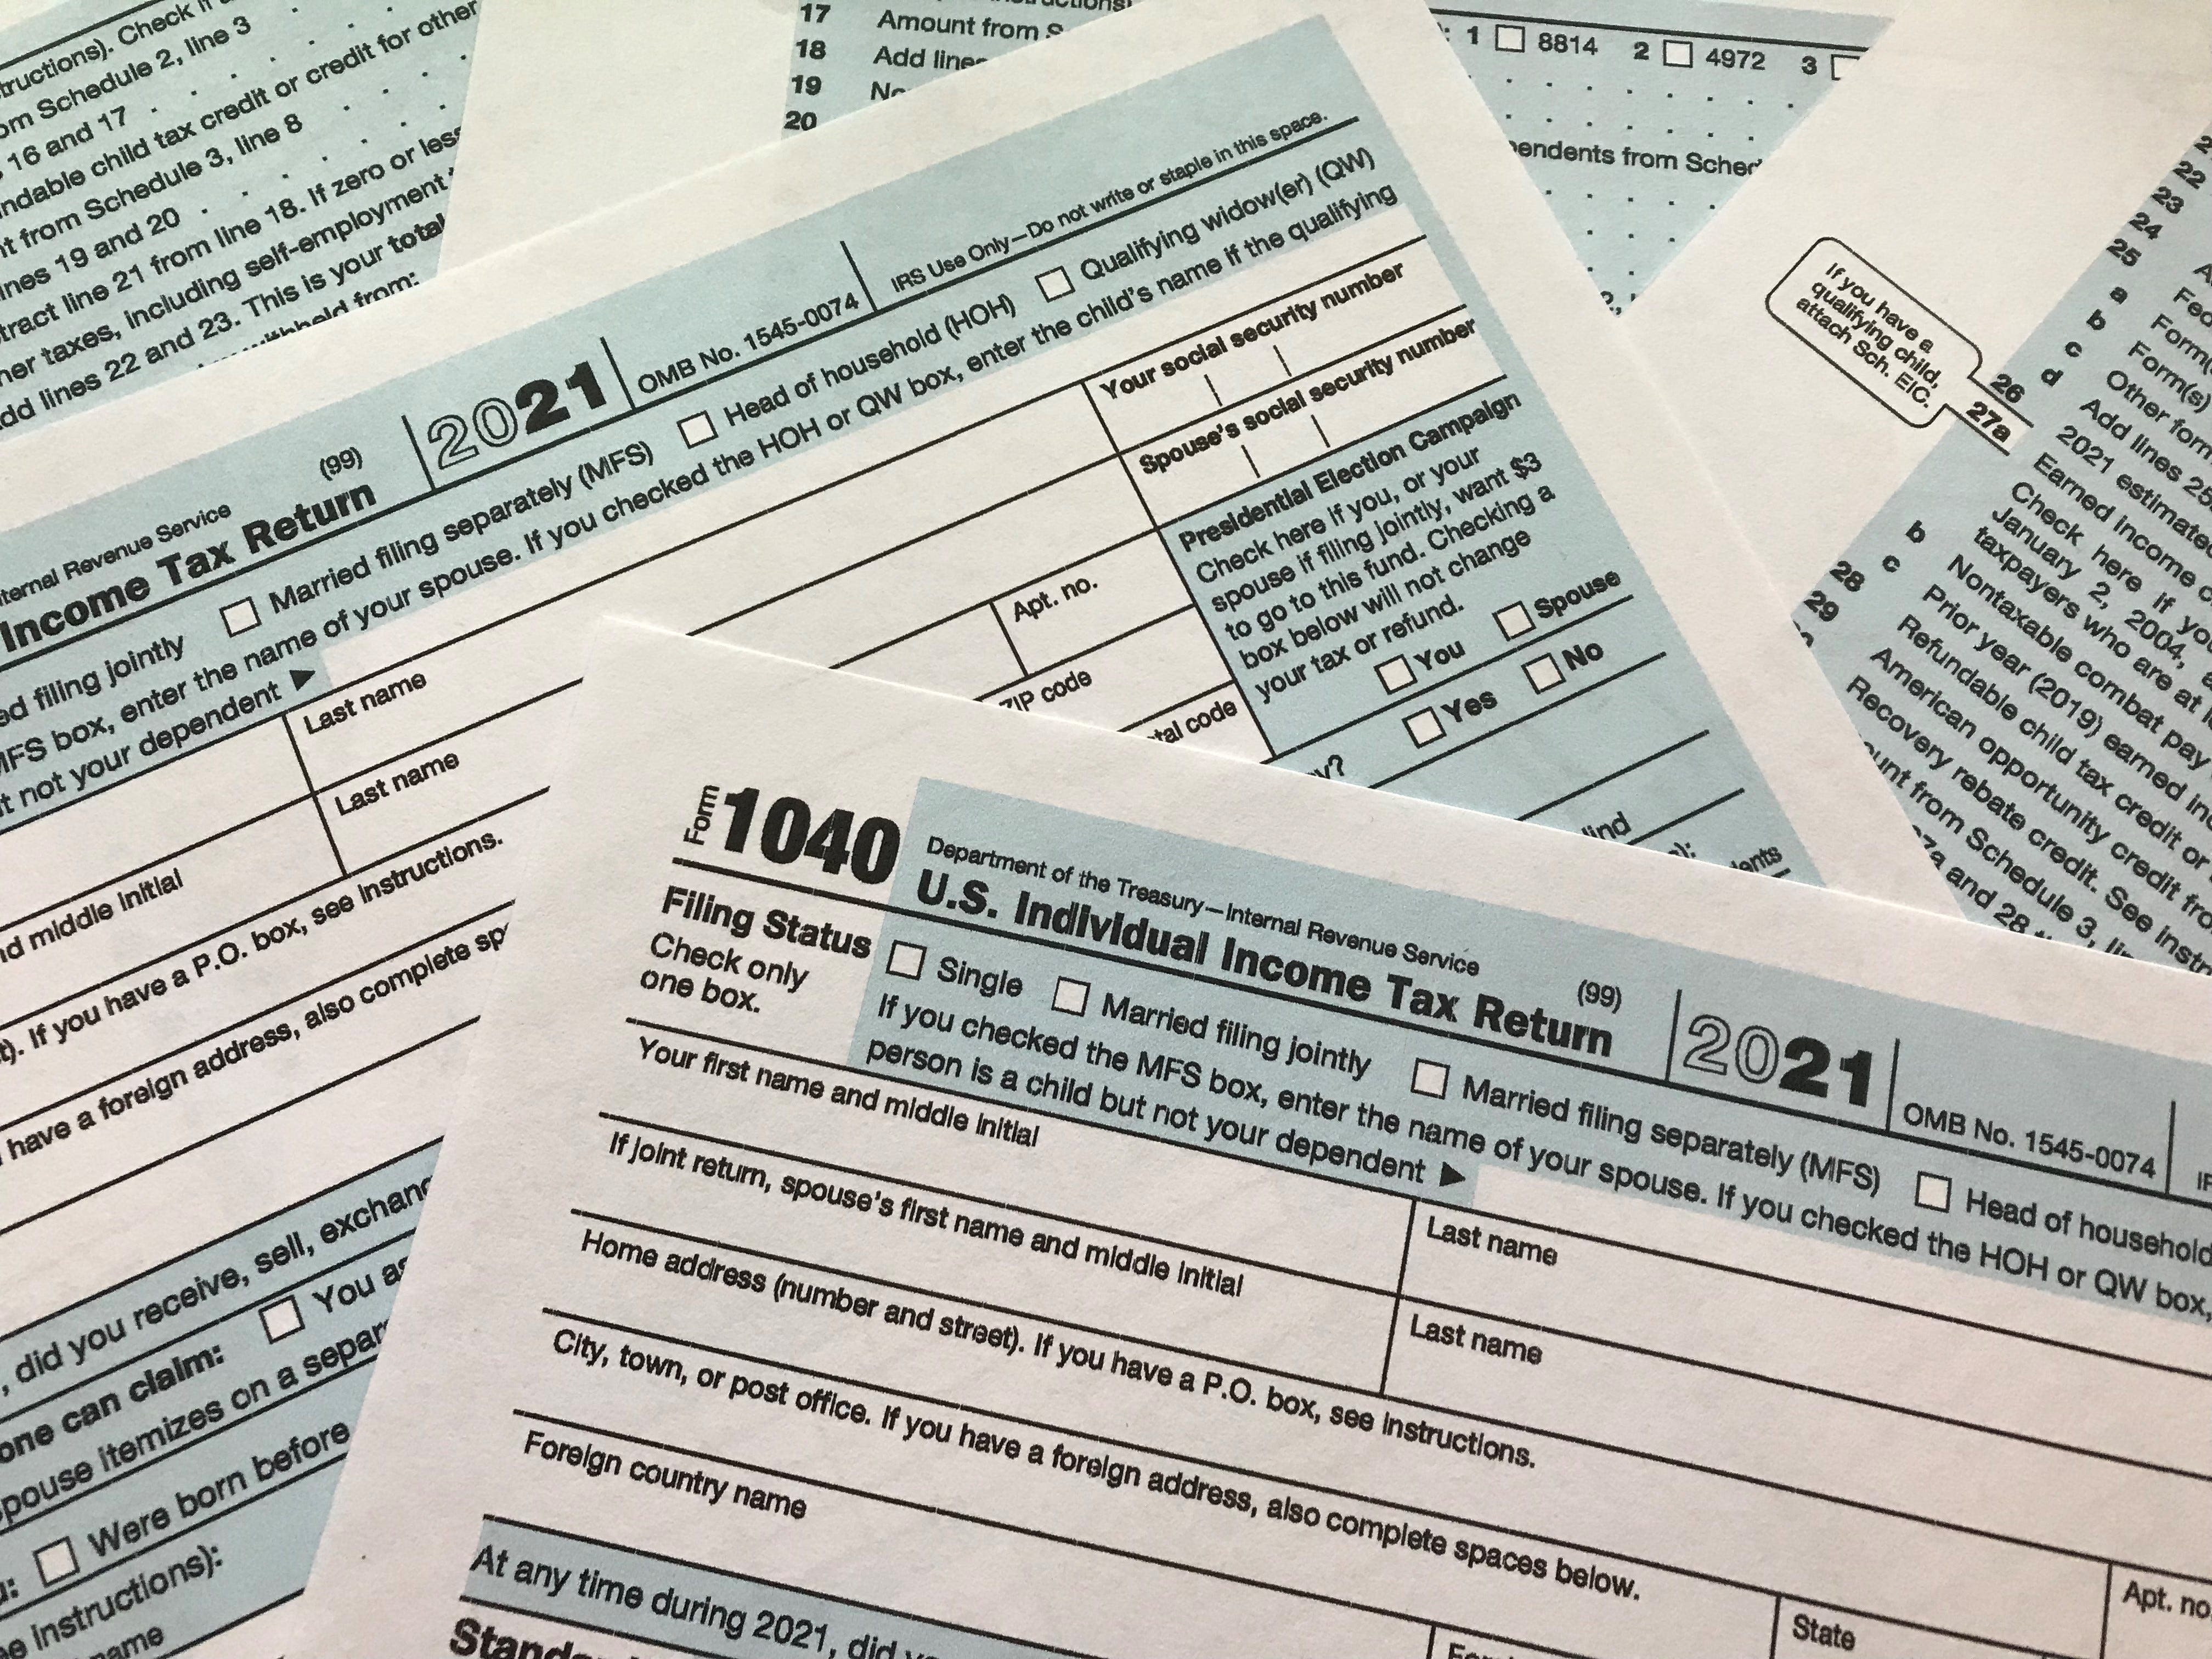 IRS Direct File is here to stay and will be available to more Americans next year